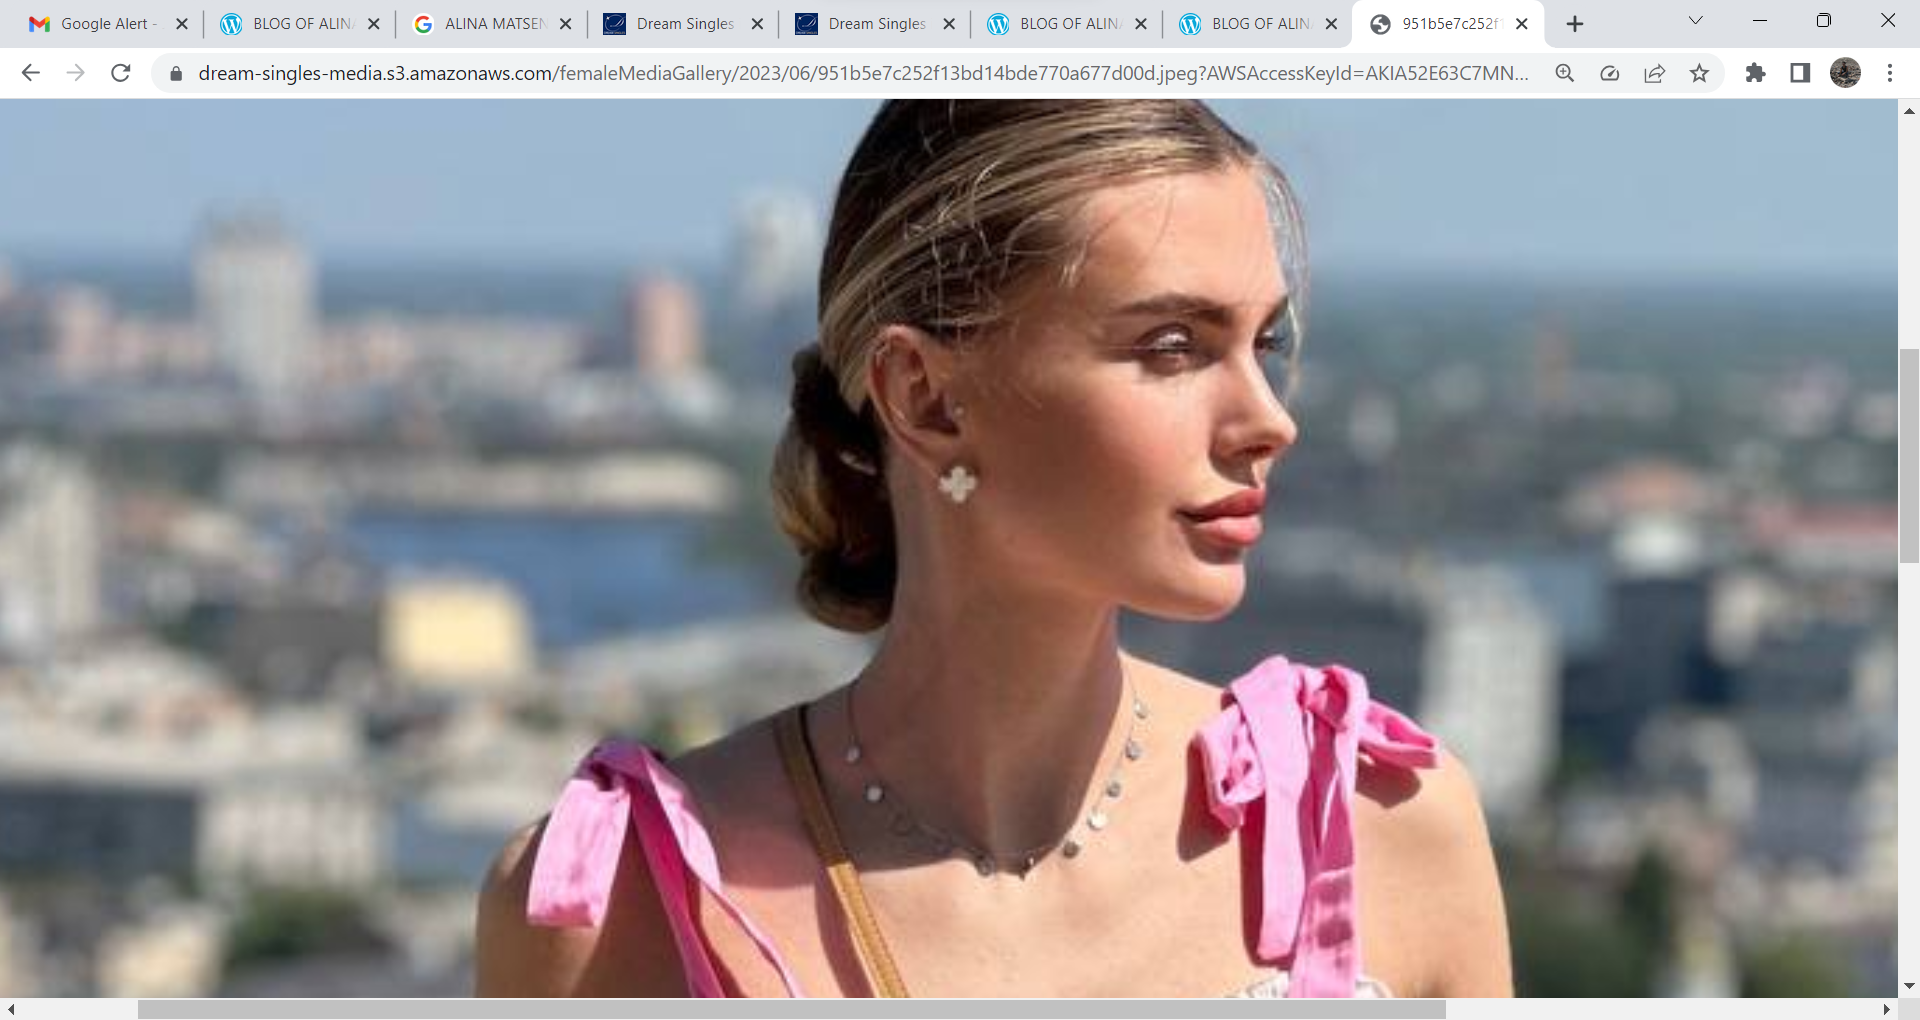 HELLO PRINCESS ALINA MATSENKO MEMSAHEB [1] YES U R BEAUTIFUL[2] YES I LOVE U [3] SORRY BUT OW NOW NOWPLEASSE FORGIVE MEI PROMISE U I WONT  HIDE AGAIN O DONT LIE I HIDE OBAM ANDOLGA  THINGS BECAUSE OEOTHERSIE THERE WODLD BE M